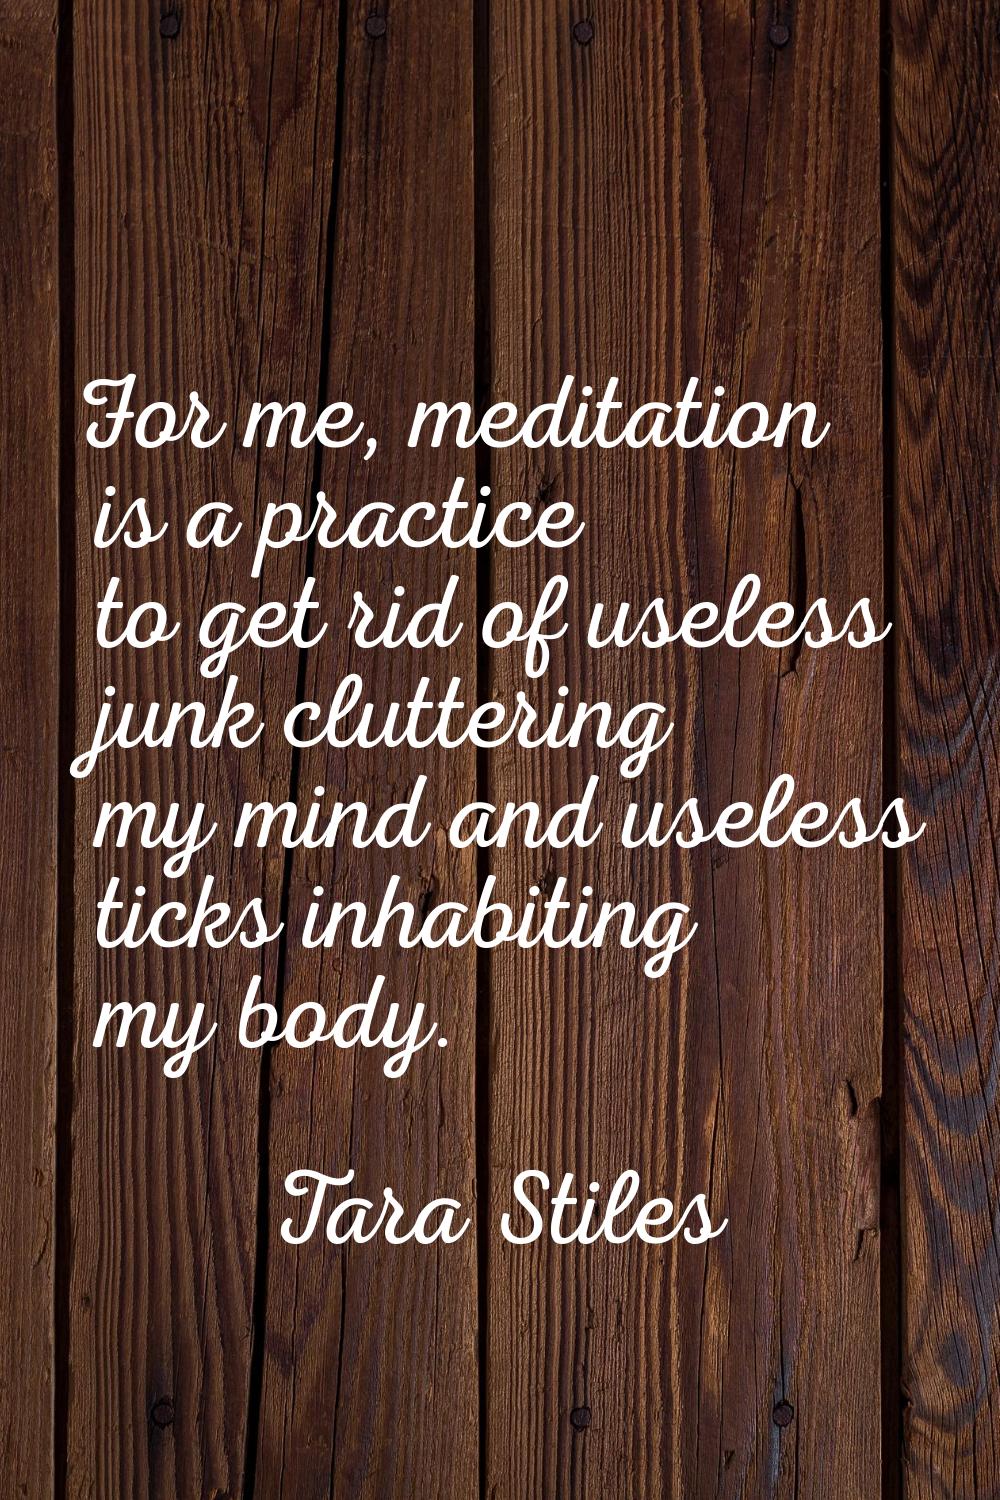 For me, meditation is a practice to get rid of useless junk cluttering my mind and useless ticks in